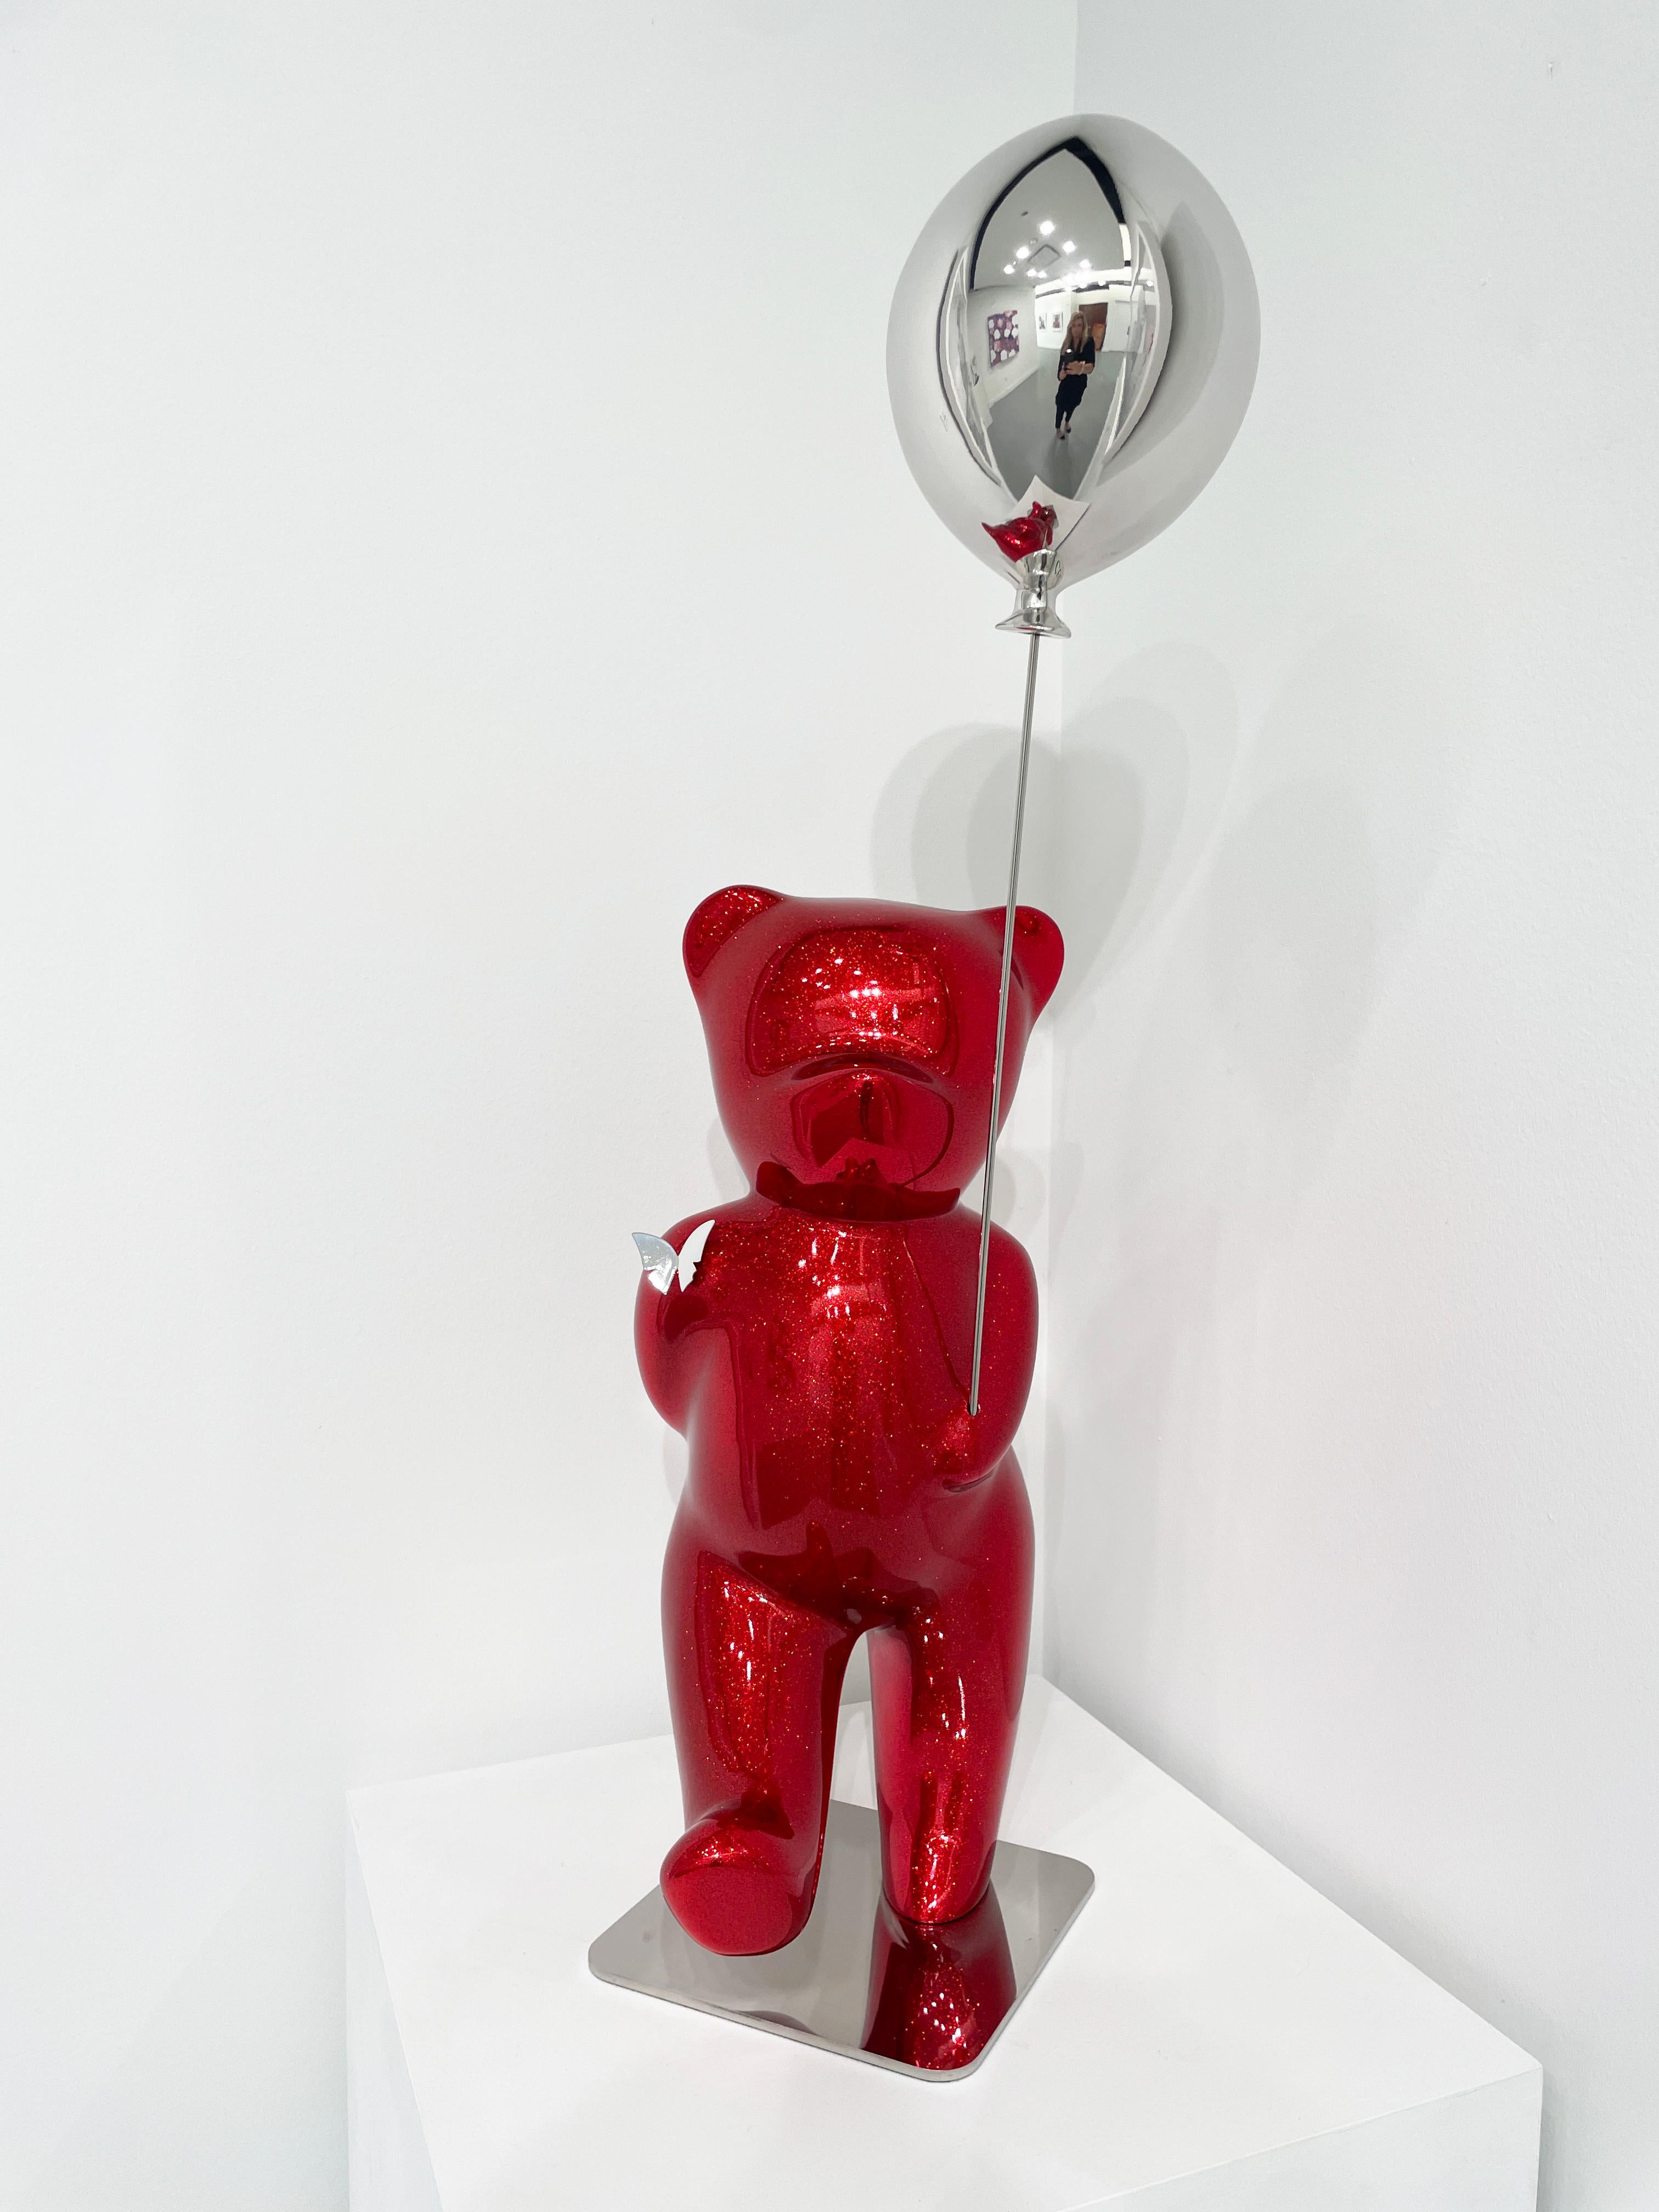 Artist: CEVE (French)
Title: Sparkly Red Glitter Balloon Silver
Edition of 8
Media: Resin glitter finish

This work is numbered 1 of 8